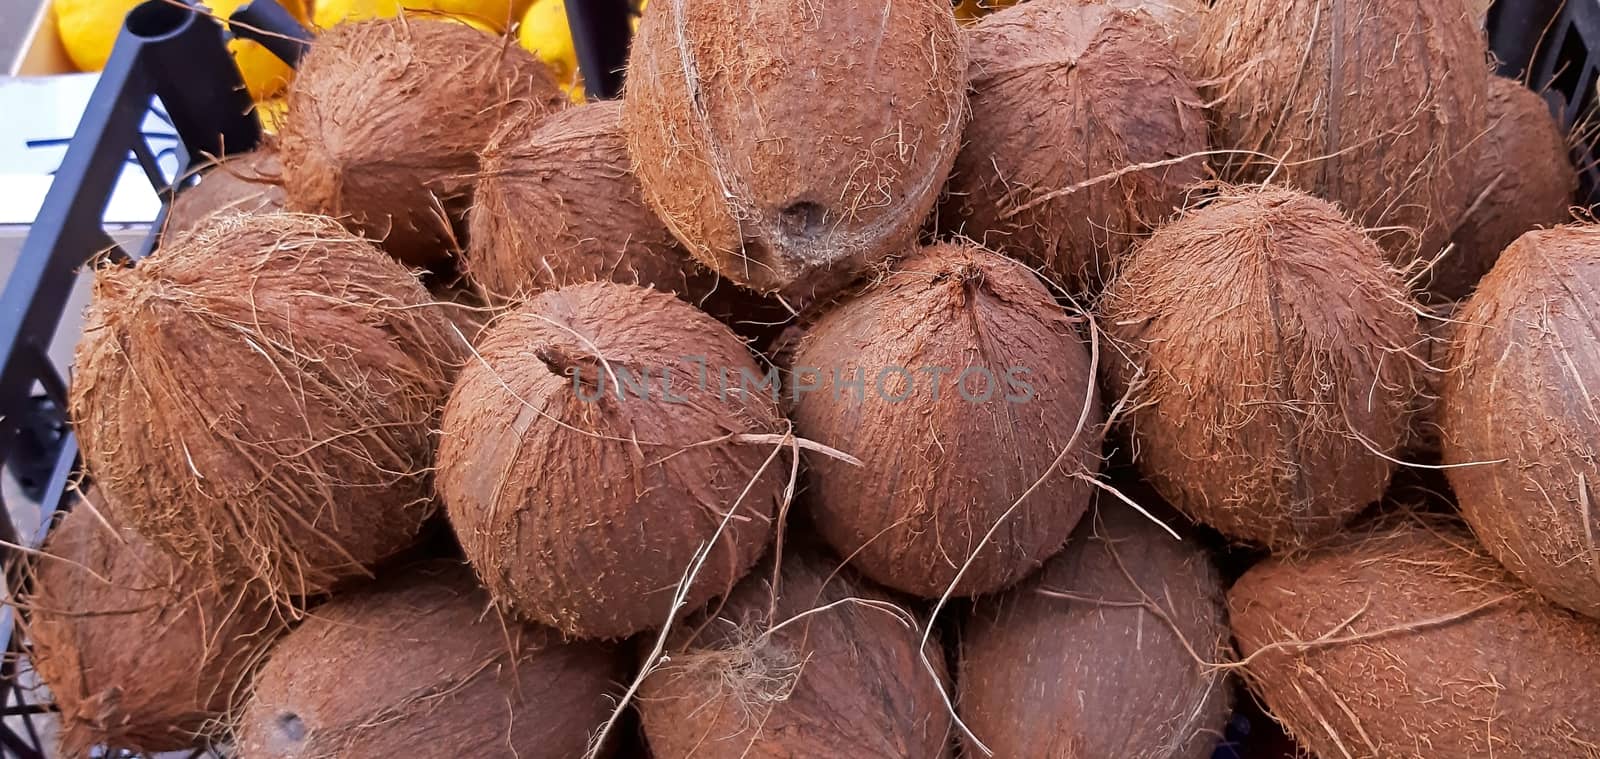 Some brown coconuts on sale textured